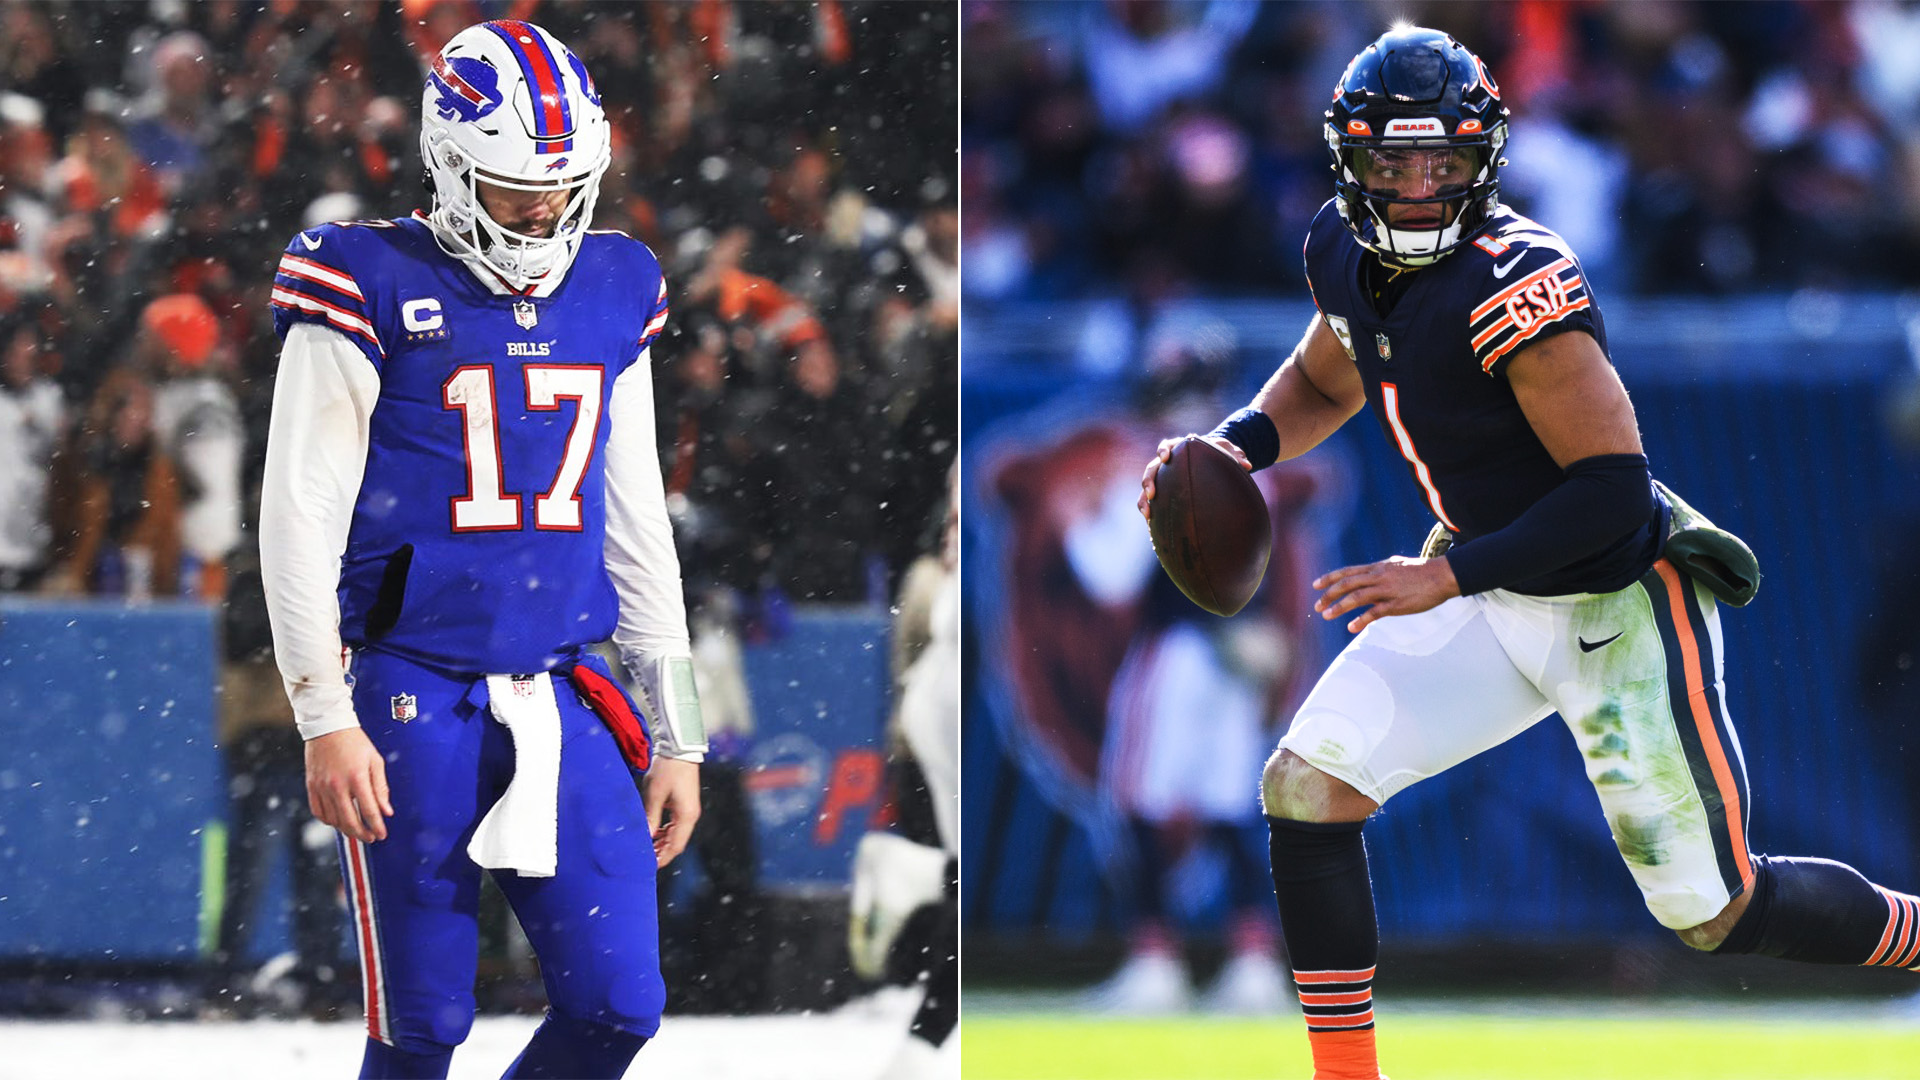 Bills’ playoff exit should be important rebuild lesson for Bears